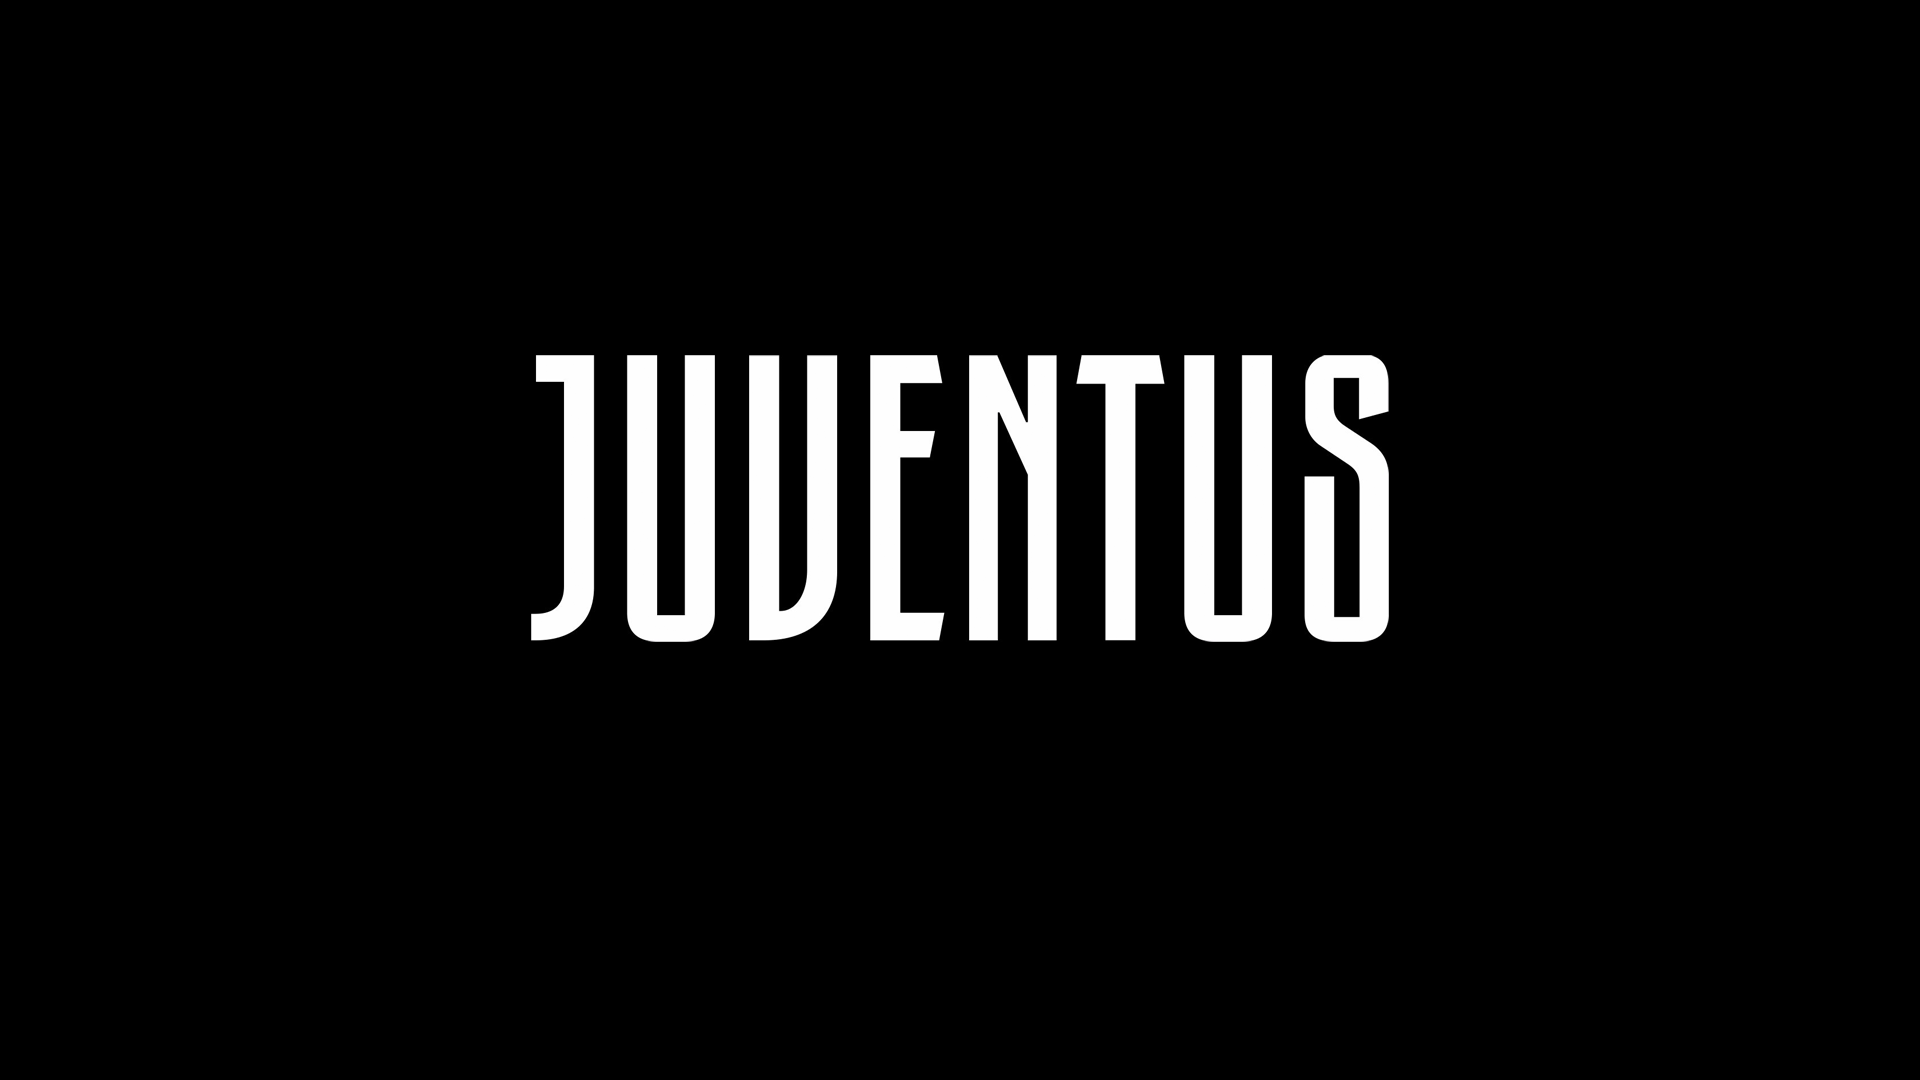 Juventus FC Wallpaper With Resolution 1920X1080 pixel. You can make this wallpaper for your Mac or Windows Desktop Background, iPhone, Android or Tablet and another Smartphone device for free